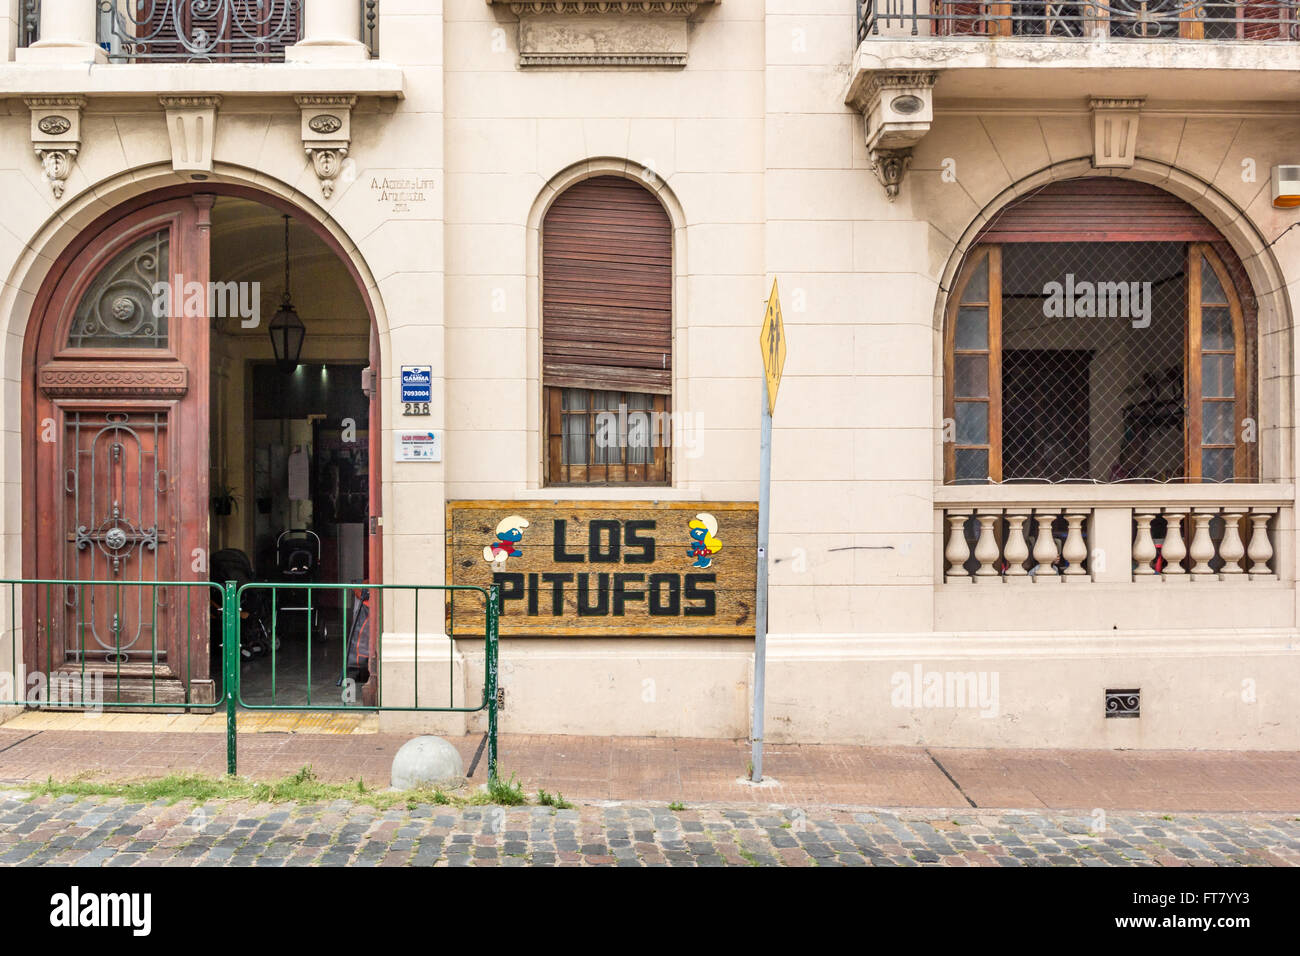 DAYCARE CENTER, MONTIVIDEO, URUGUAY - CIRCA DECEMBER 2015.  The Los Pitufos (The Smurfs) daycare center. Stock Photo